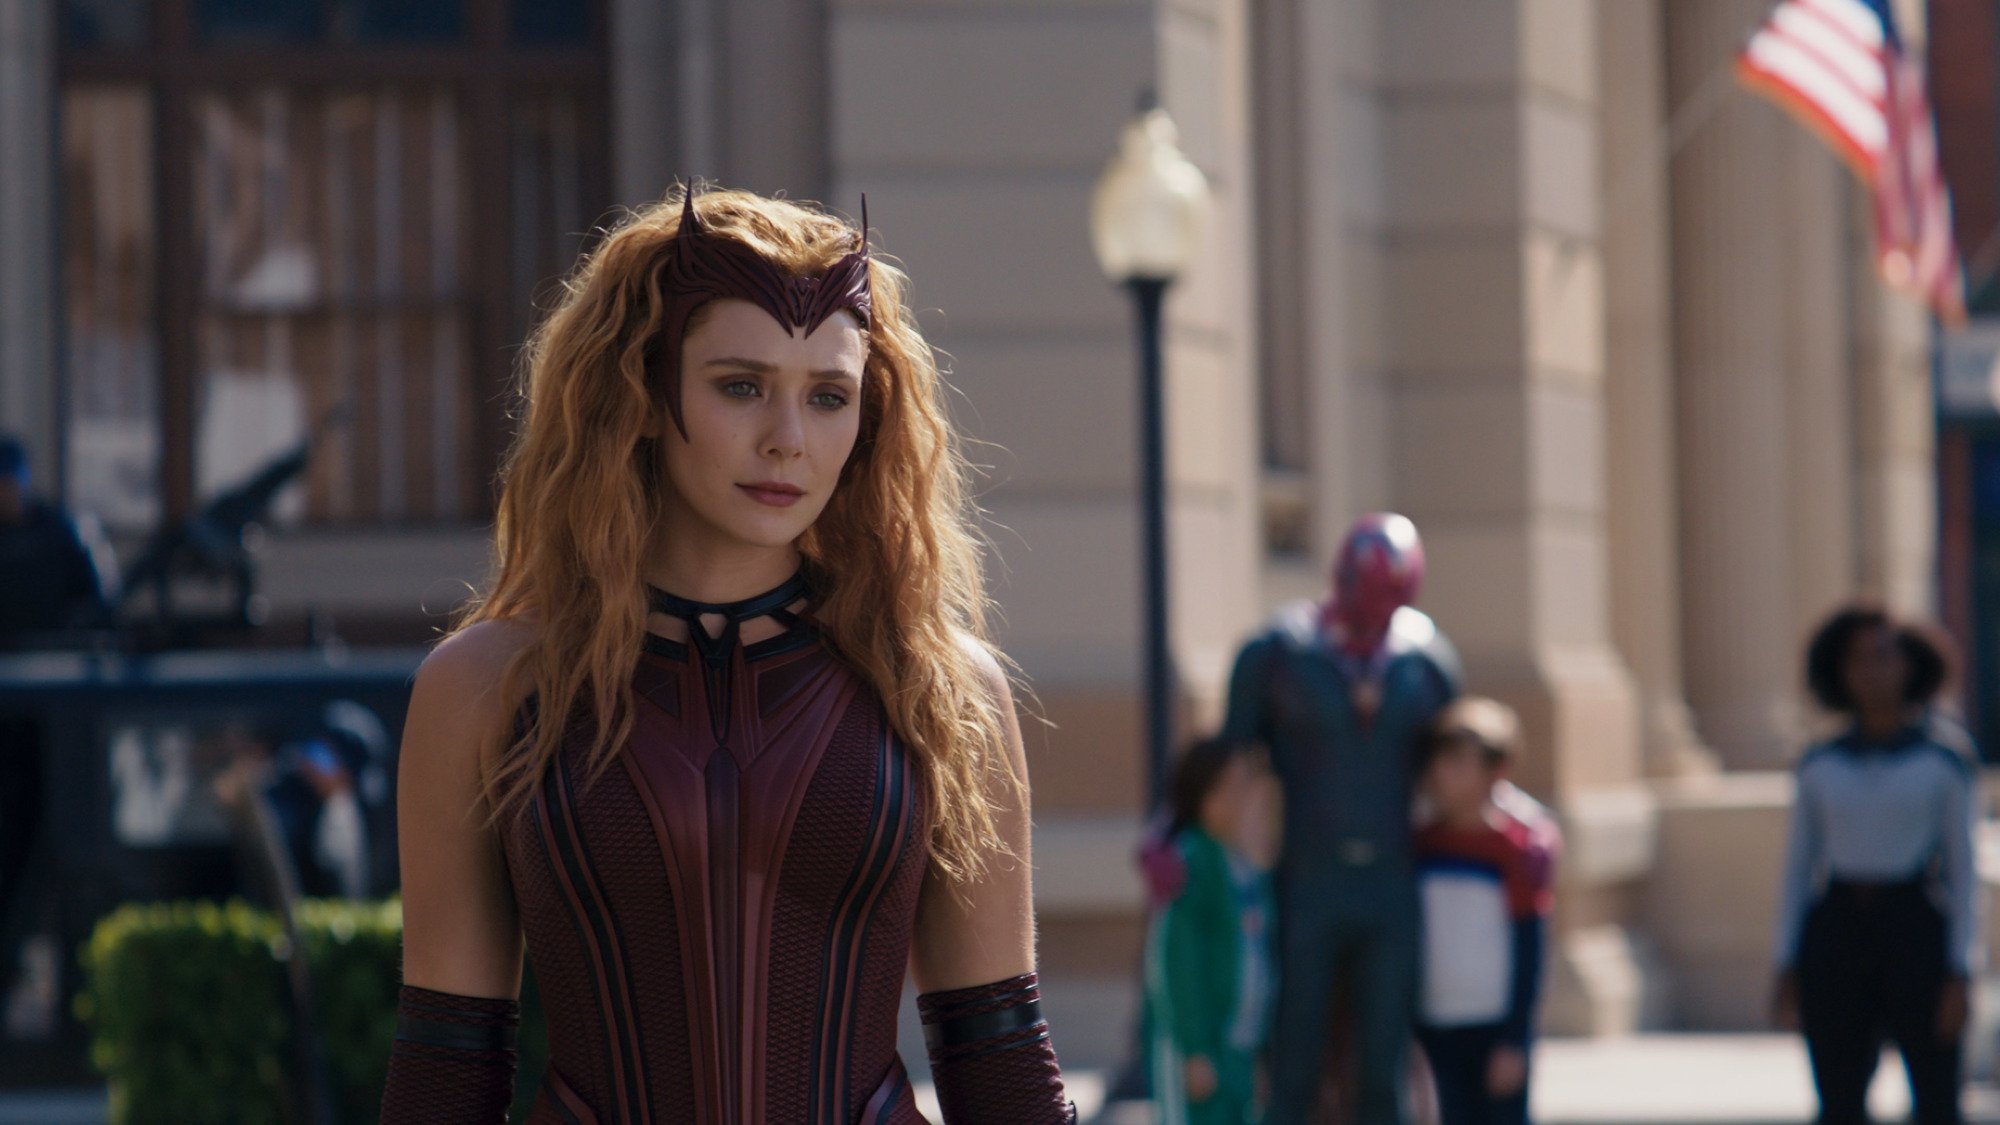 Elizabeth Olsen as Wanda Maximoff wearingher Scarlet Witch costume in 'WandaVision.' She has a dark red corset, dark red gloves that go up to her elbow, and a headband that looks like devil horns. Her red hair is down and curled, and she's looking down at something.